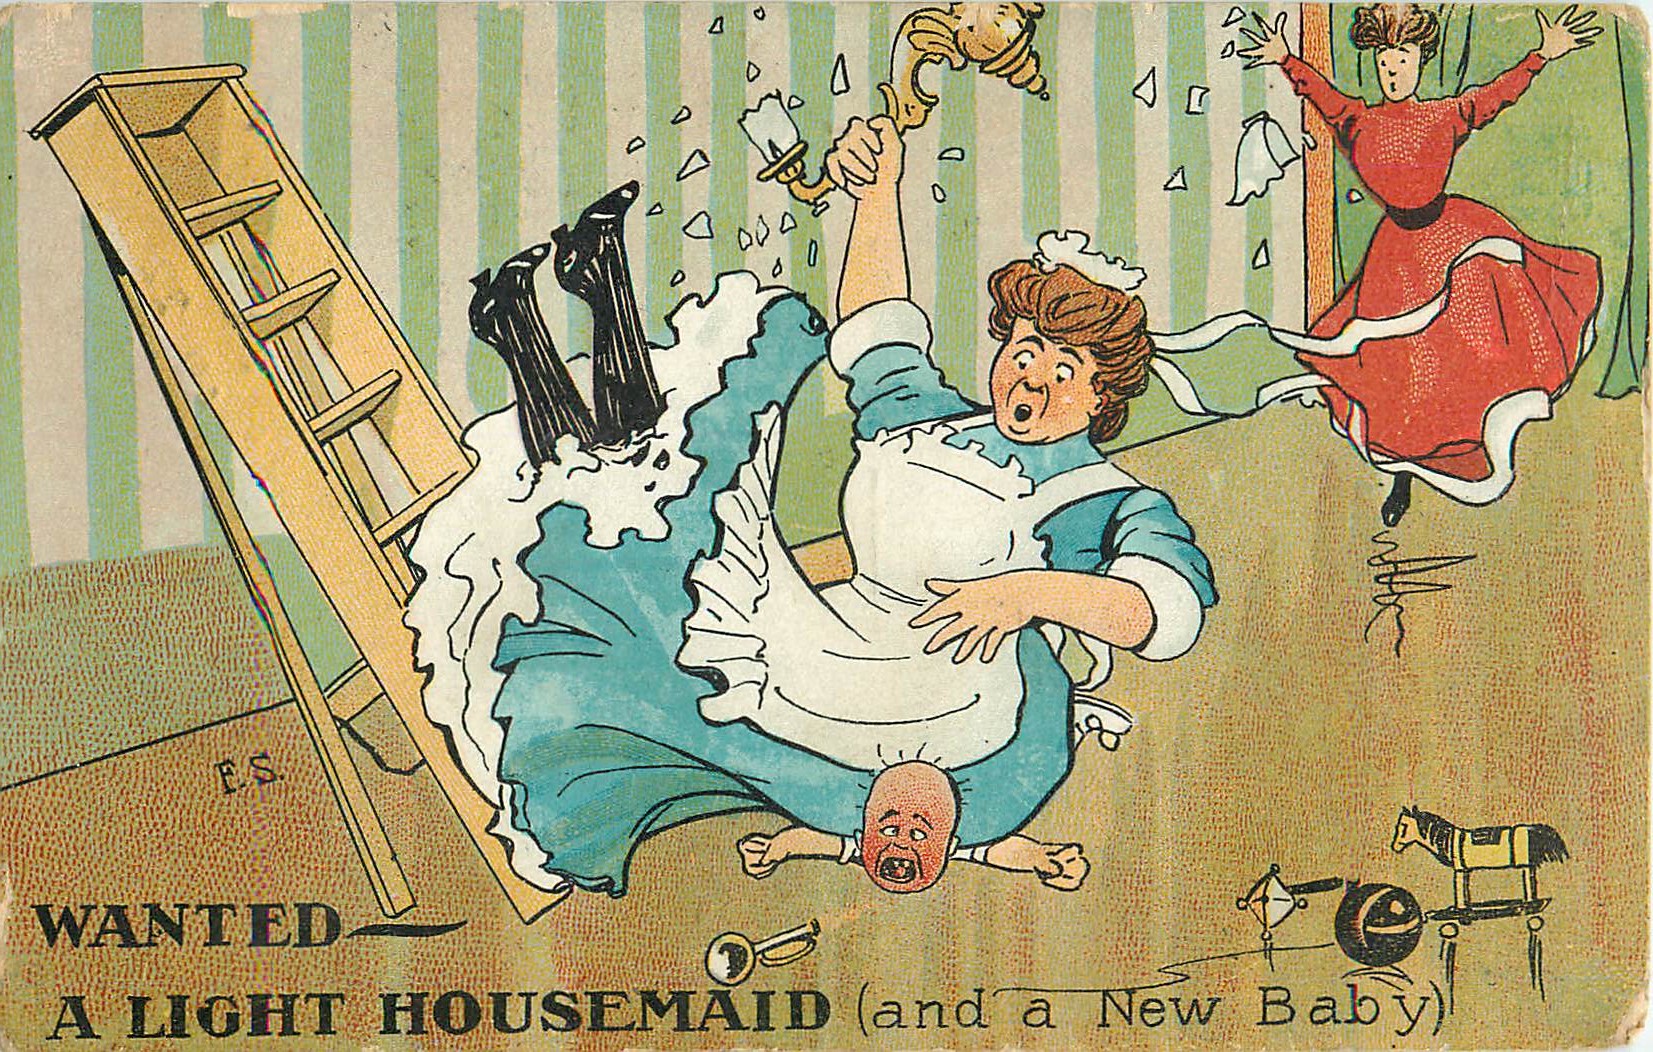 Wanted- A Light Housemaid